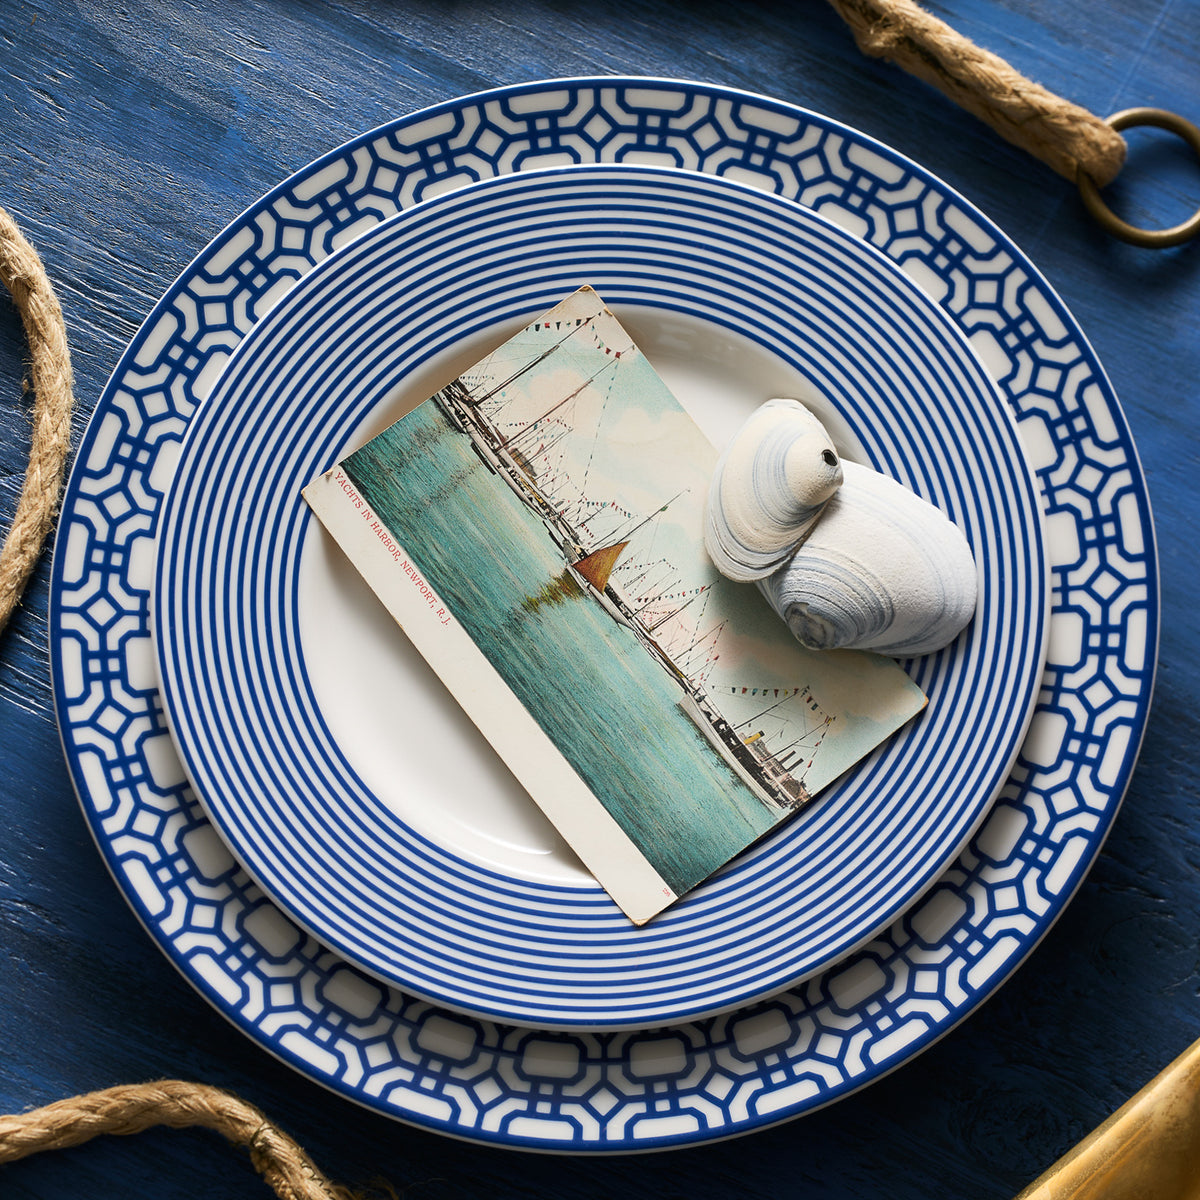 A nautical-themed table setting featuring a blue and white patterned Newport Garden Gate Rimmed Dinner Plate by Caskata Artisanal Home, a postcard with a ship illustration, and two seashells.